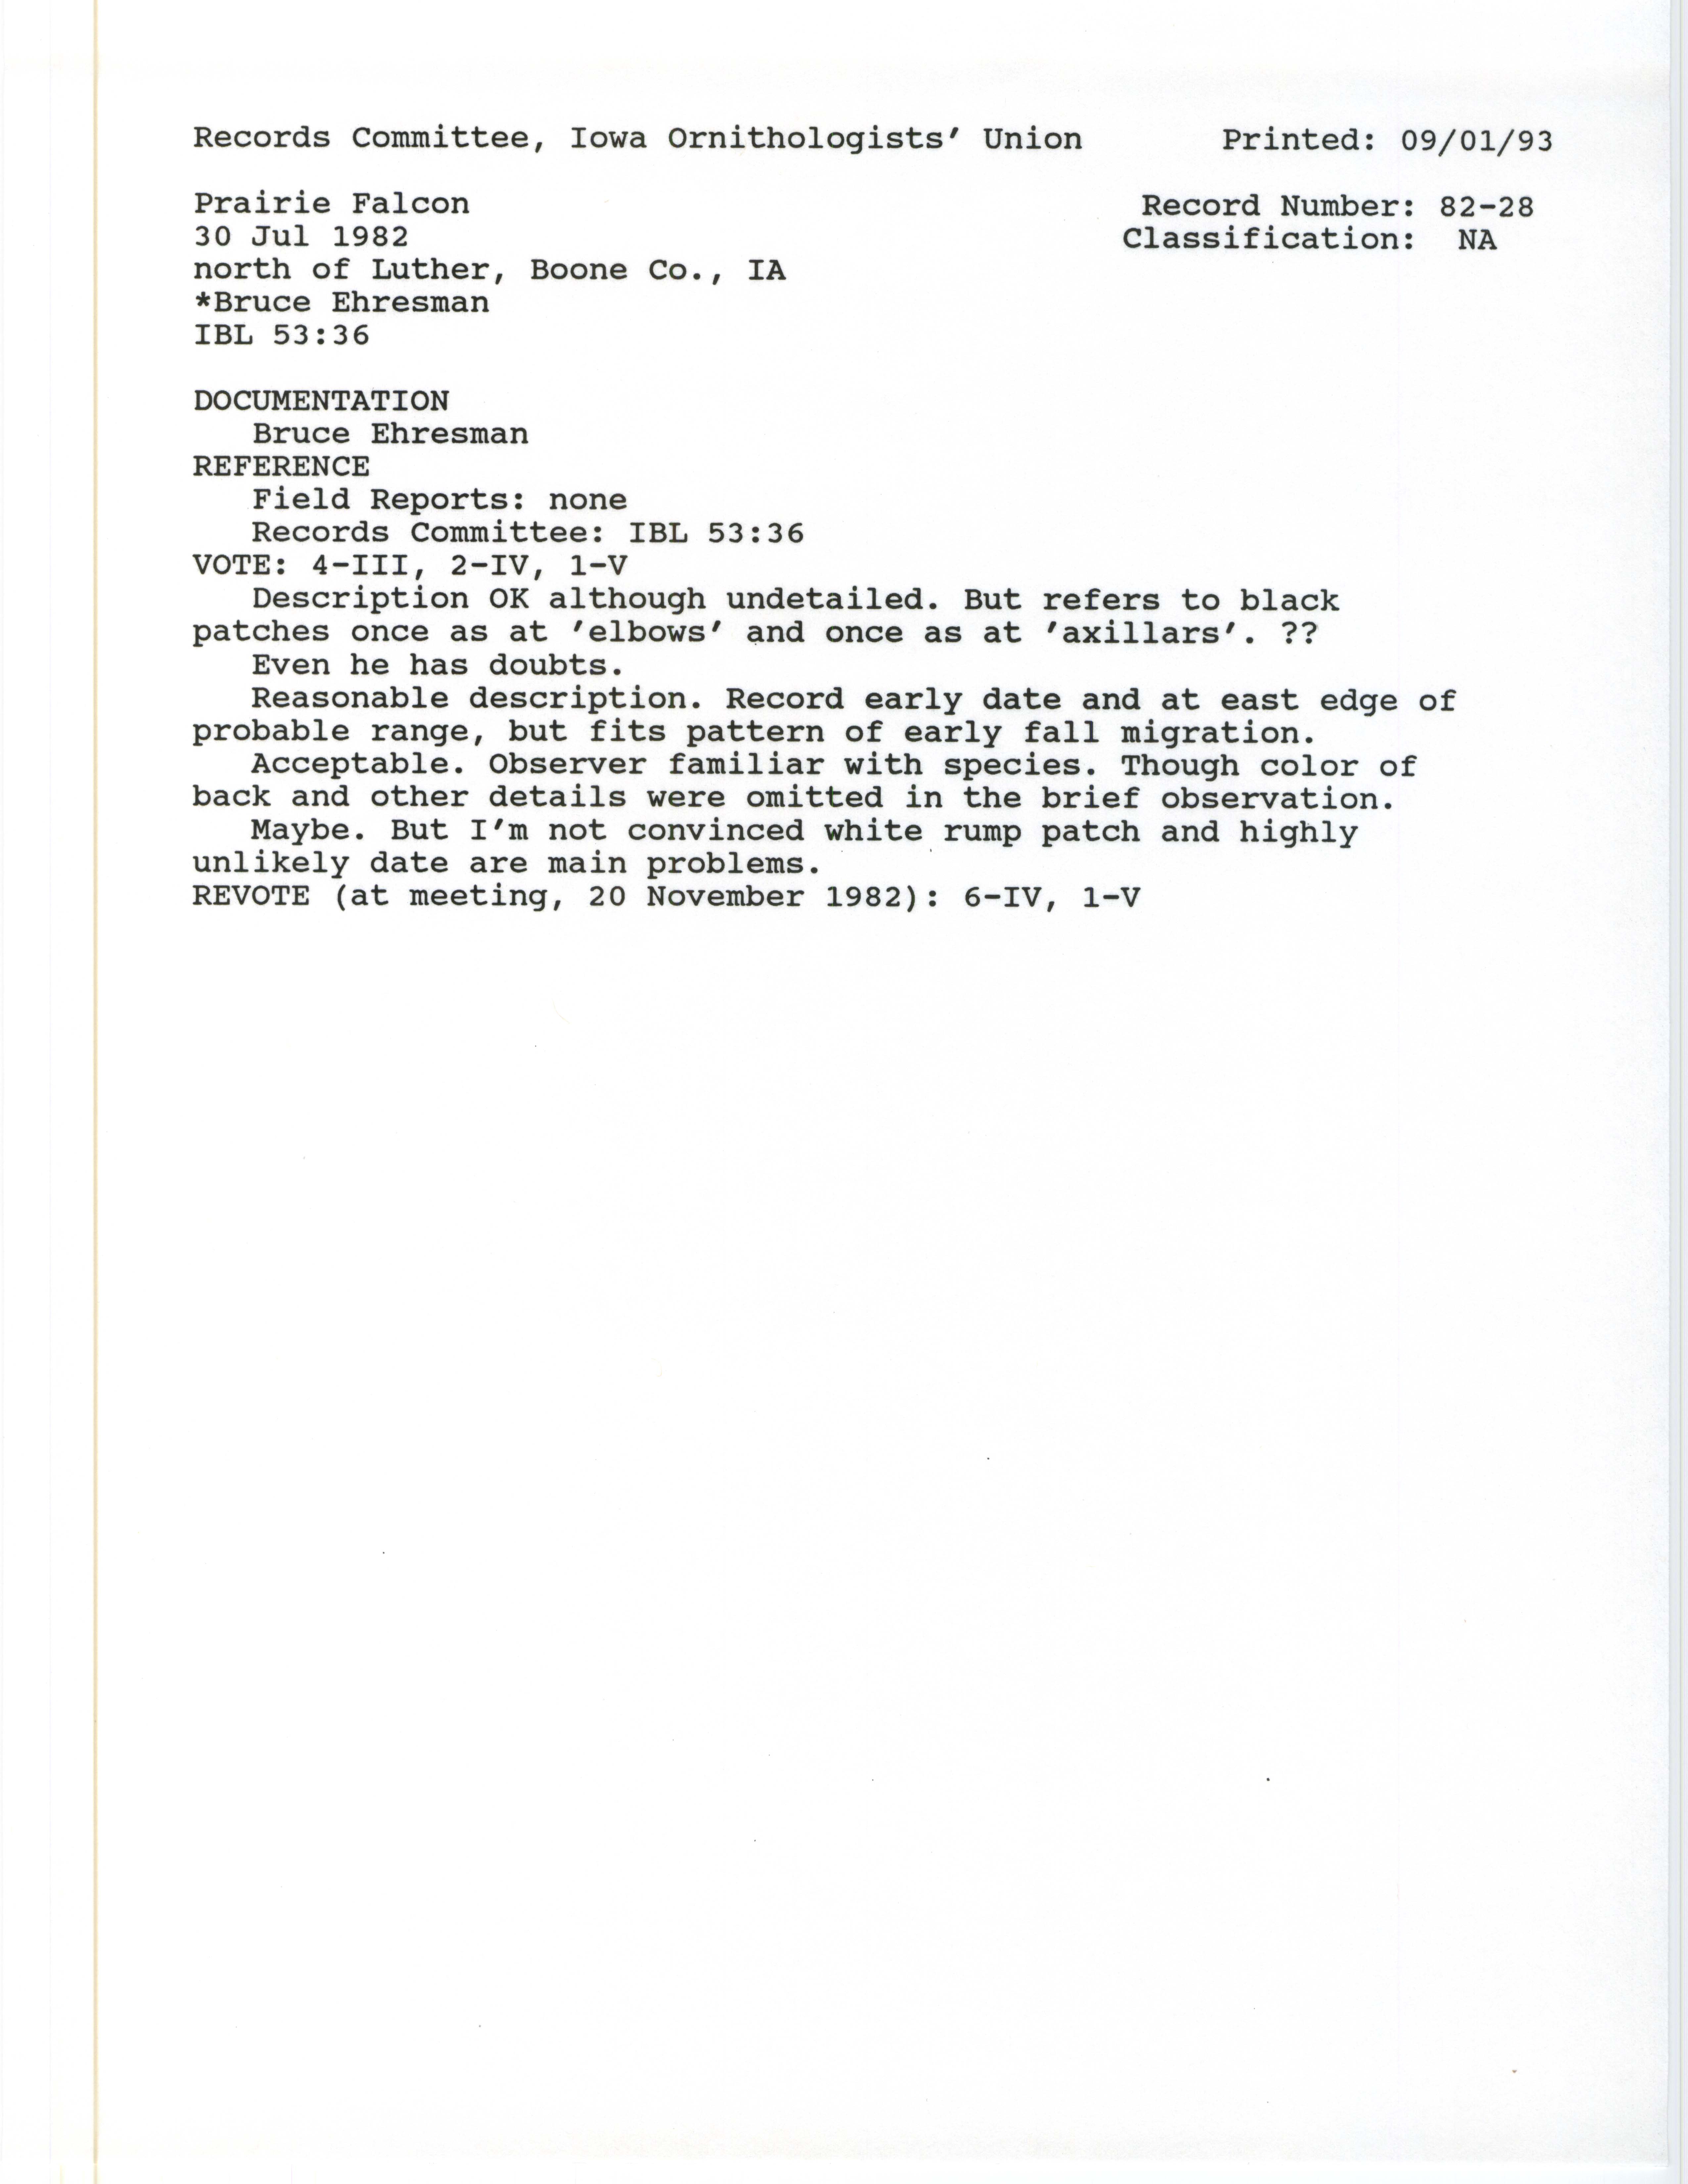 Records Committee review for rare bird sighting of Prairie Falcon north of Luther, 1982